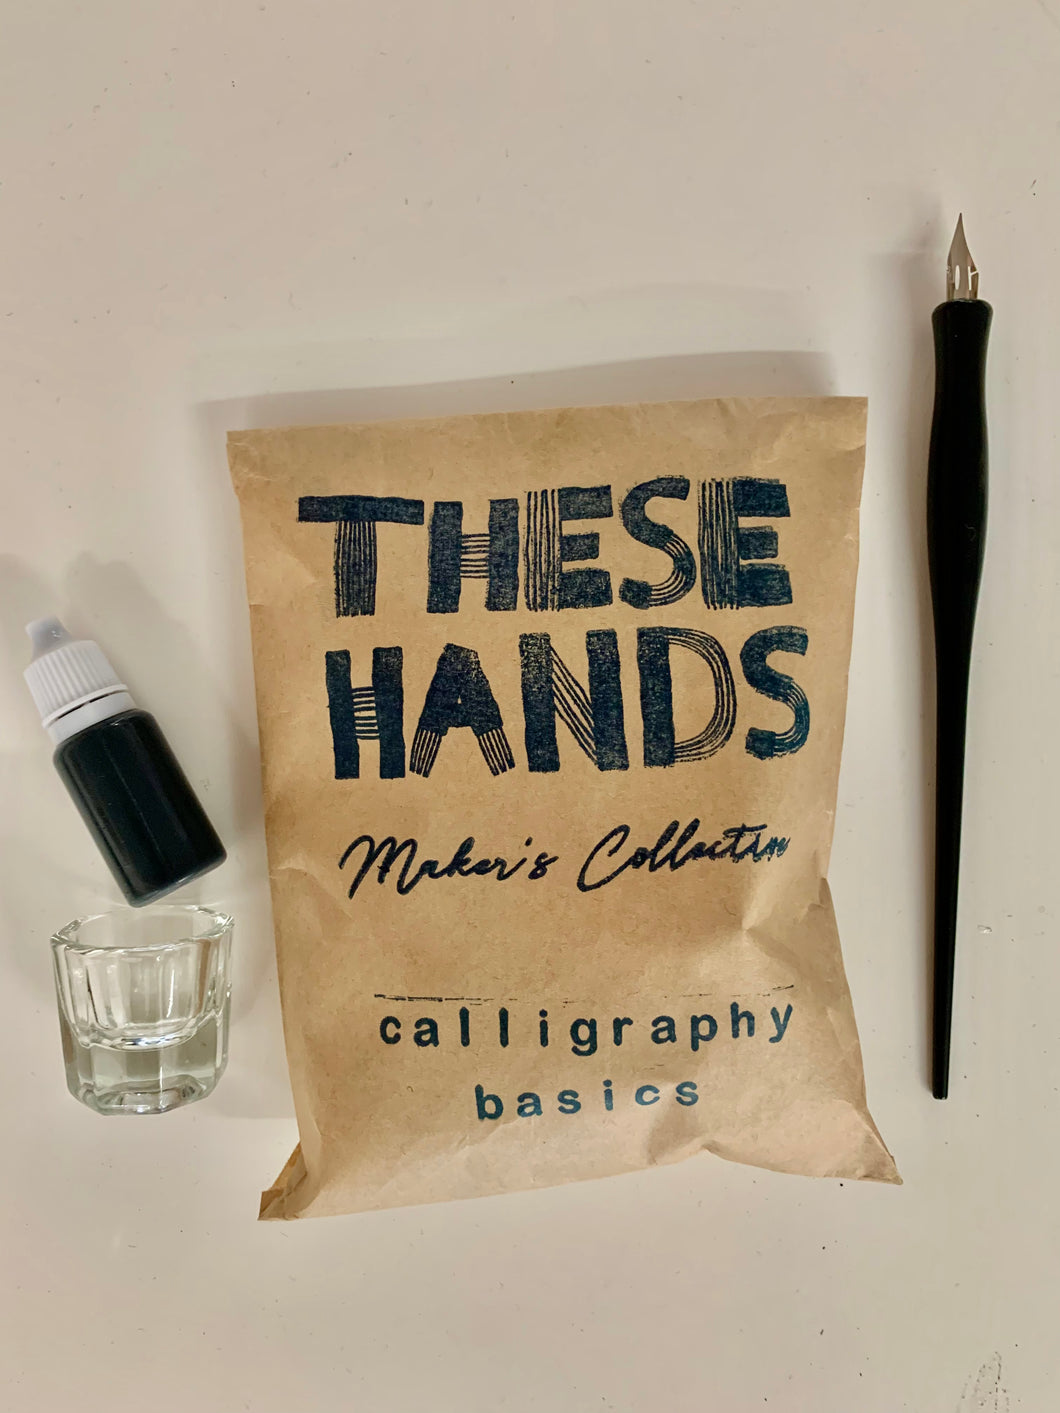 These Hands Basic Calligraphy Kit